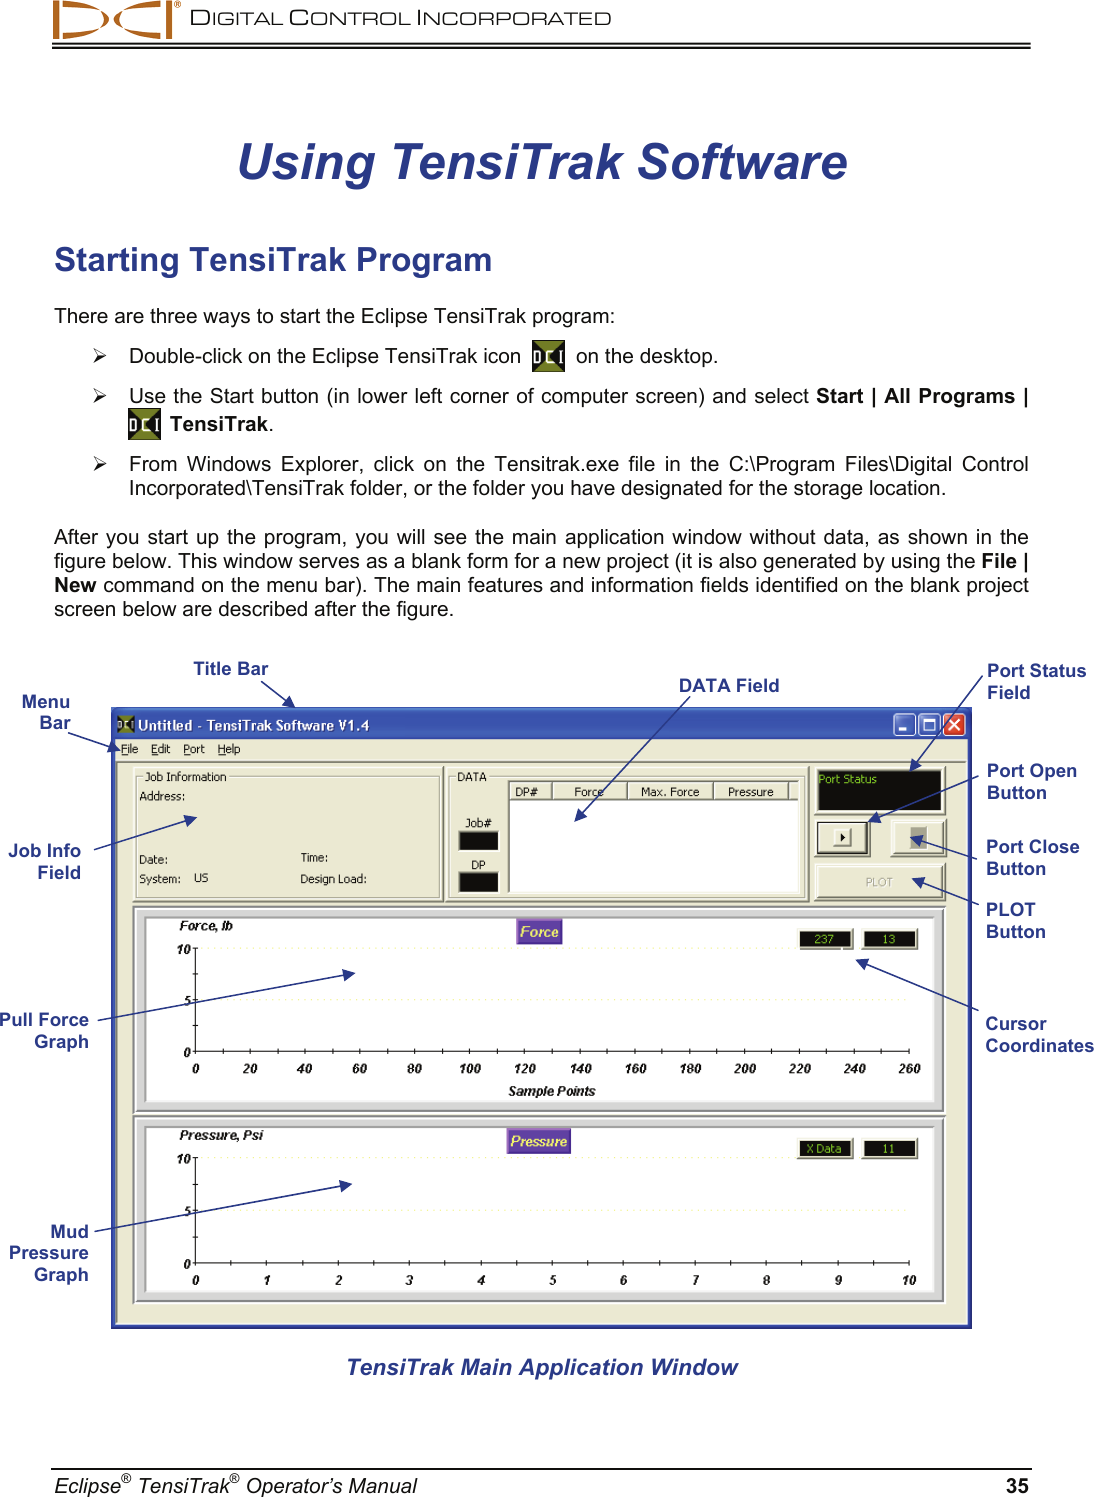  DIGITAL CONTROL INCORPORATED  Eclipse® TensiTrak® Operator’s Manual  35 Using TensiTrak Software Starting TensiTrak Program There are three ways to start the Eclipse TensiTrak program:  ¾  Double-click on the Eclipse TensiTrak icon     on the desktop. ¾  Use the Start button (in lower left corner of computer screen) and select Start | All Programs |    TensiTrak. ¾  From Windows Explorer, click on the Tensitrak.exe file in the C:\Program Files\Digital Control Incorporated\TensiTrak folder, or the folder you have designated for the storage location.  After you start up the program, you will see the main application window without data, as shown in the figure below. This window serves as a blank form for a new project (it is also generated by using the File | New command on the menu bar). The main features and information fields identified on the blank project screen below are described after the figure.    TensiTrak Main Application Window  Menu  Bar PLOT Button Port Close Button Port Open Button Port Status Field DATA FieldTitle Bar Mud Pressure Graph Job Info Field Pull Force Graph  Cursor Coordinates 